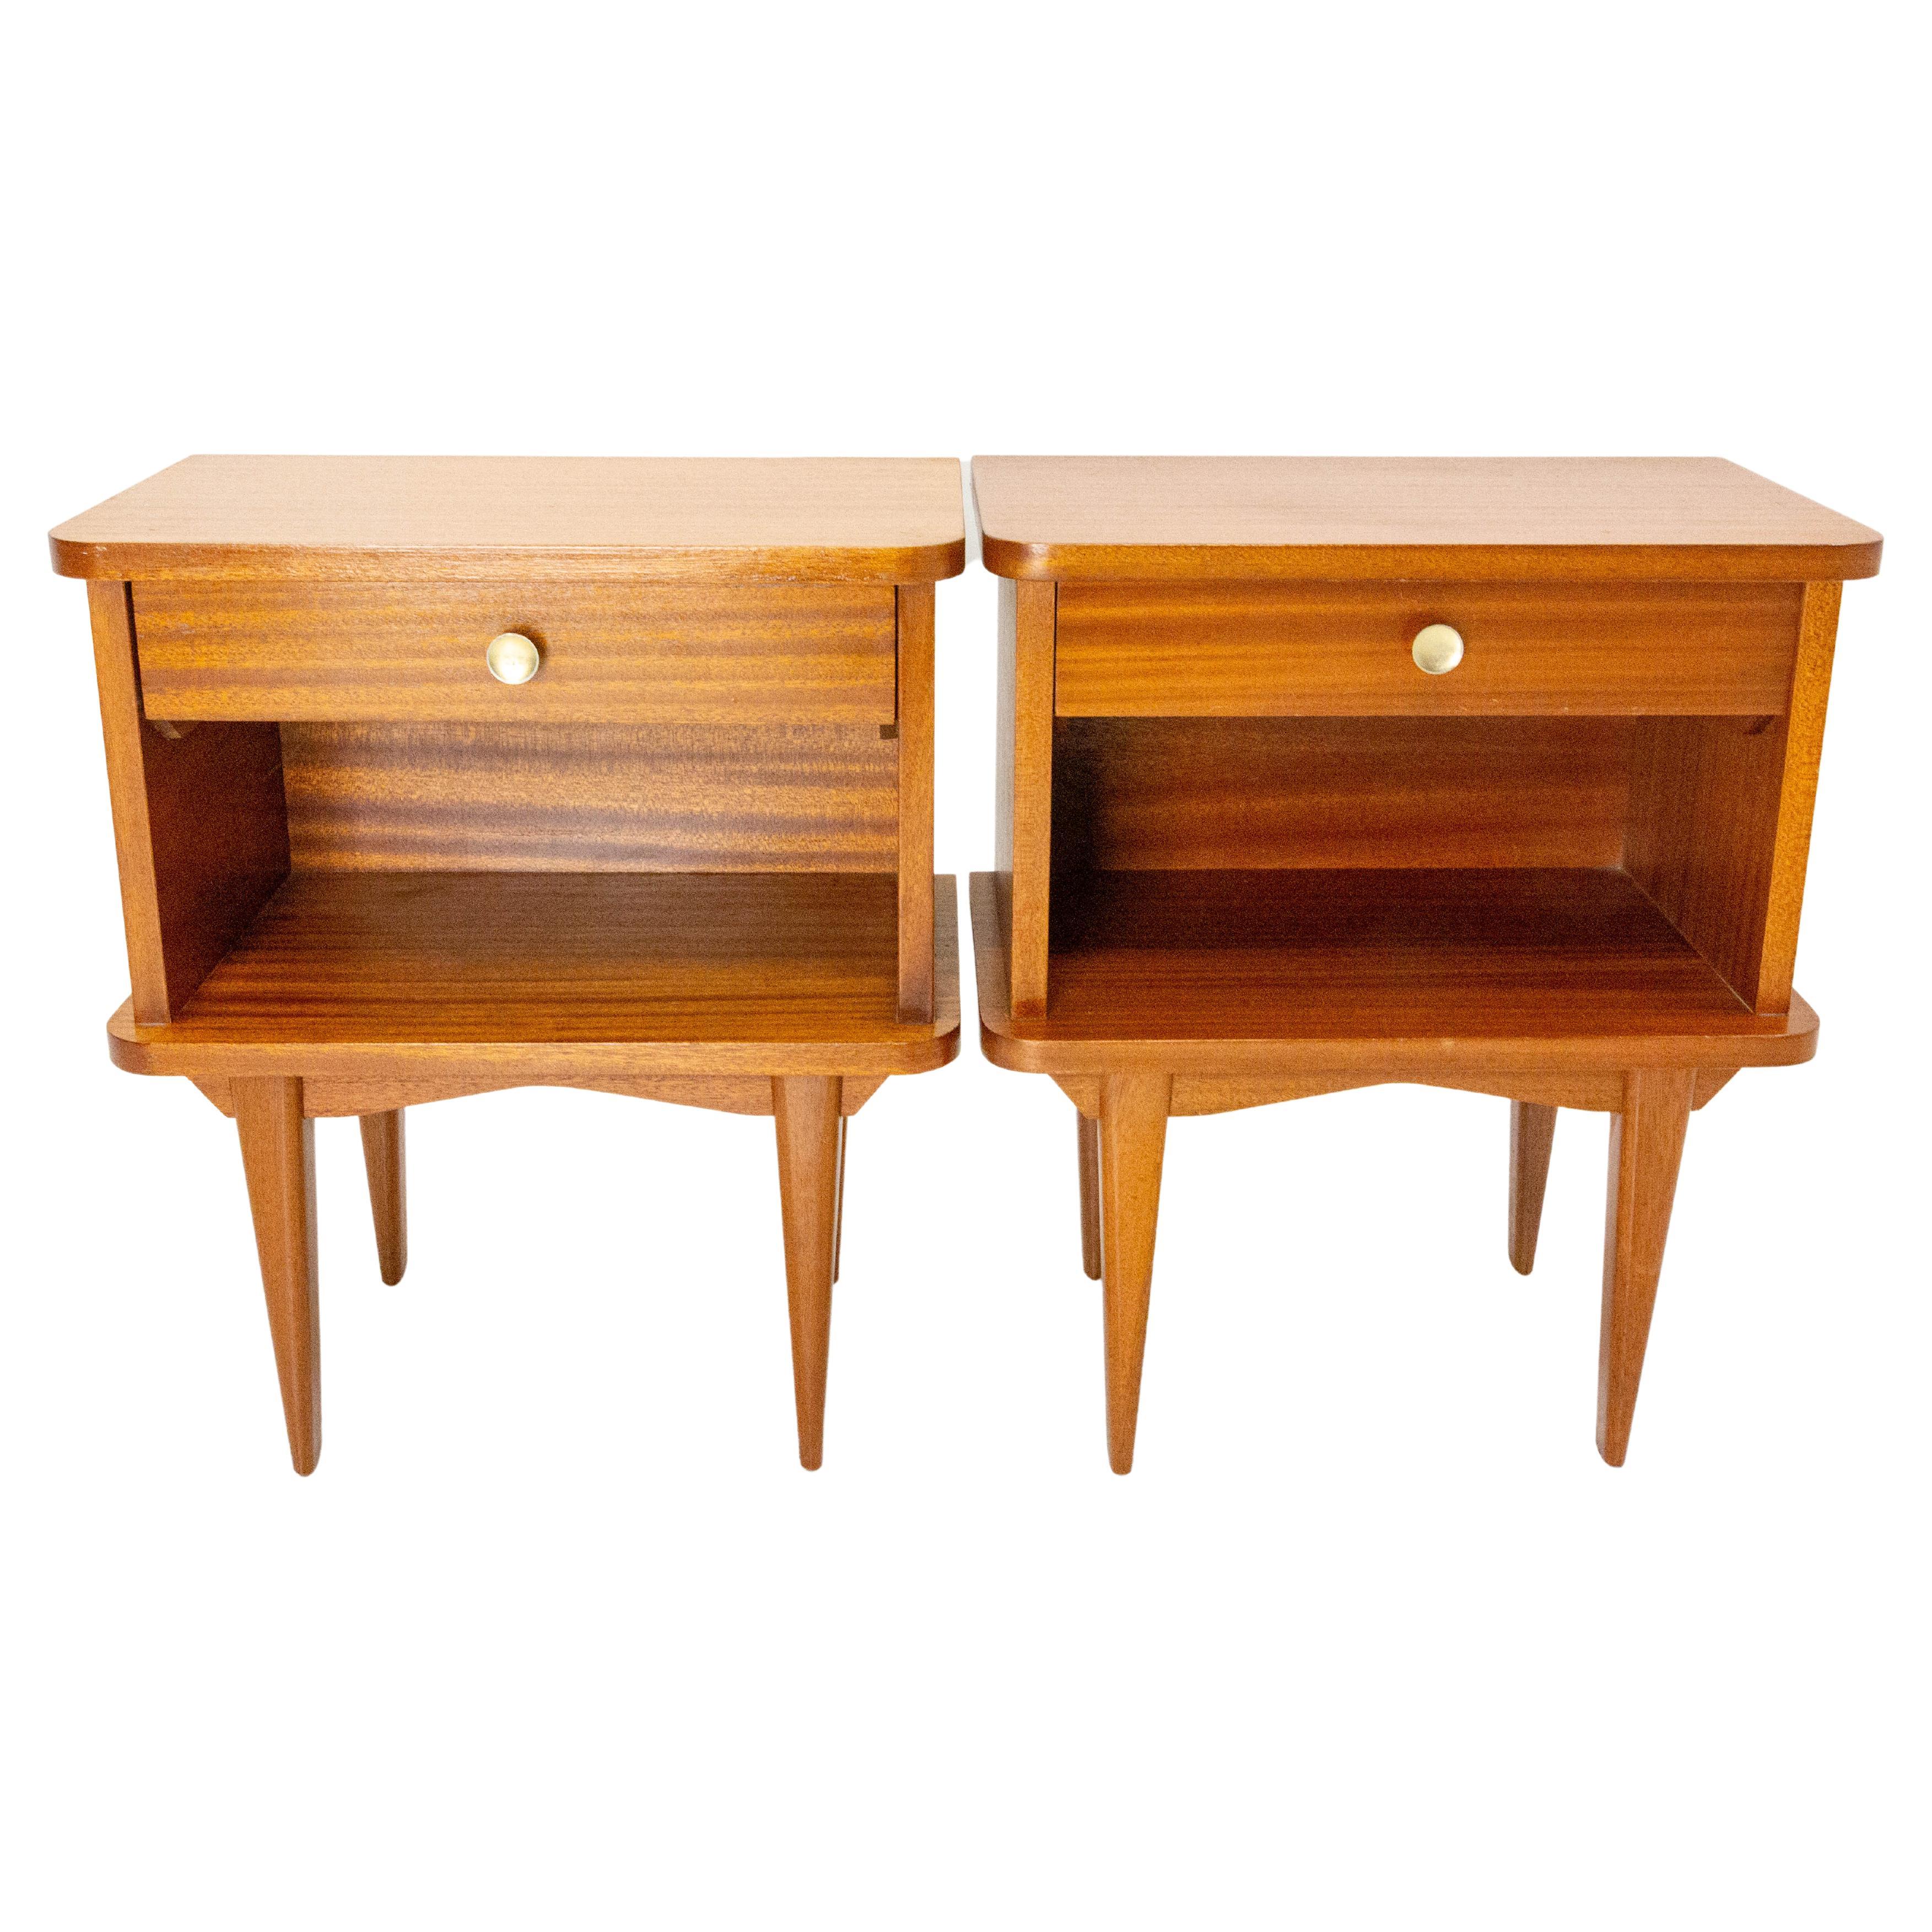 French Pair of Wood Nightstands Side Cabinets Bedside Tables, circa 1960